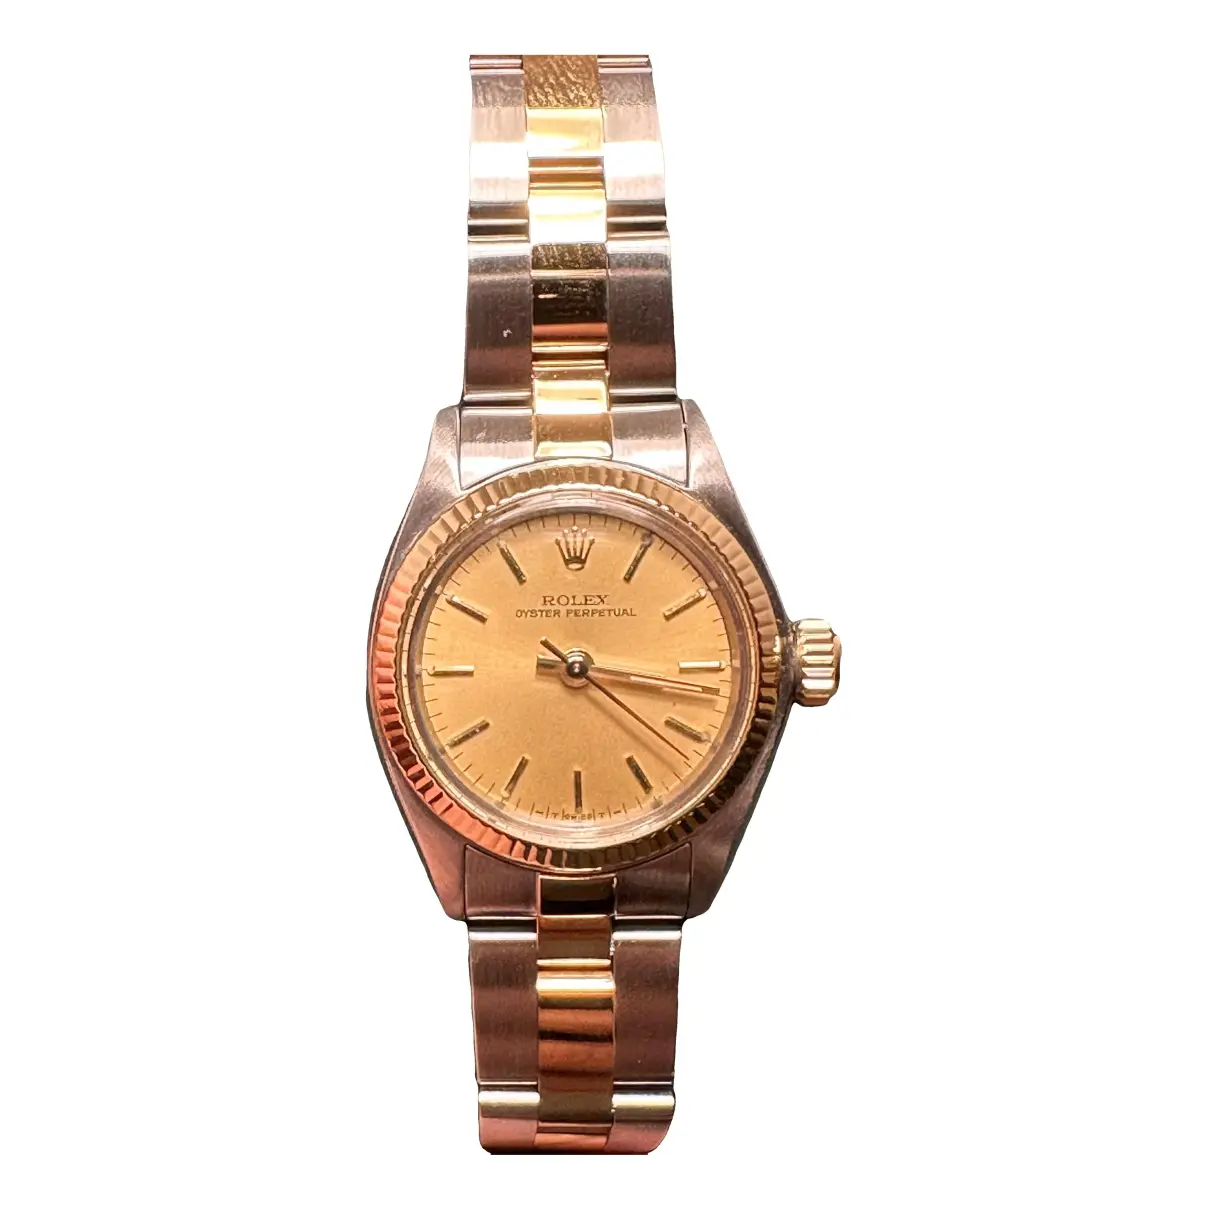 Lady Oyster Perpetual 26mm watch Rolex